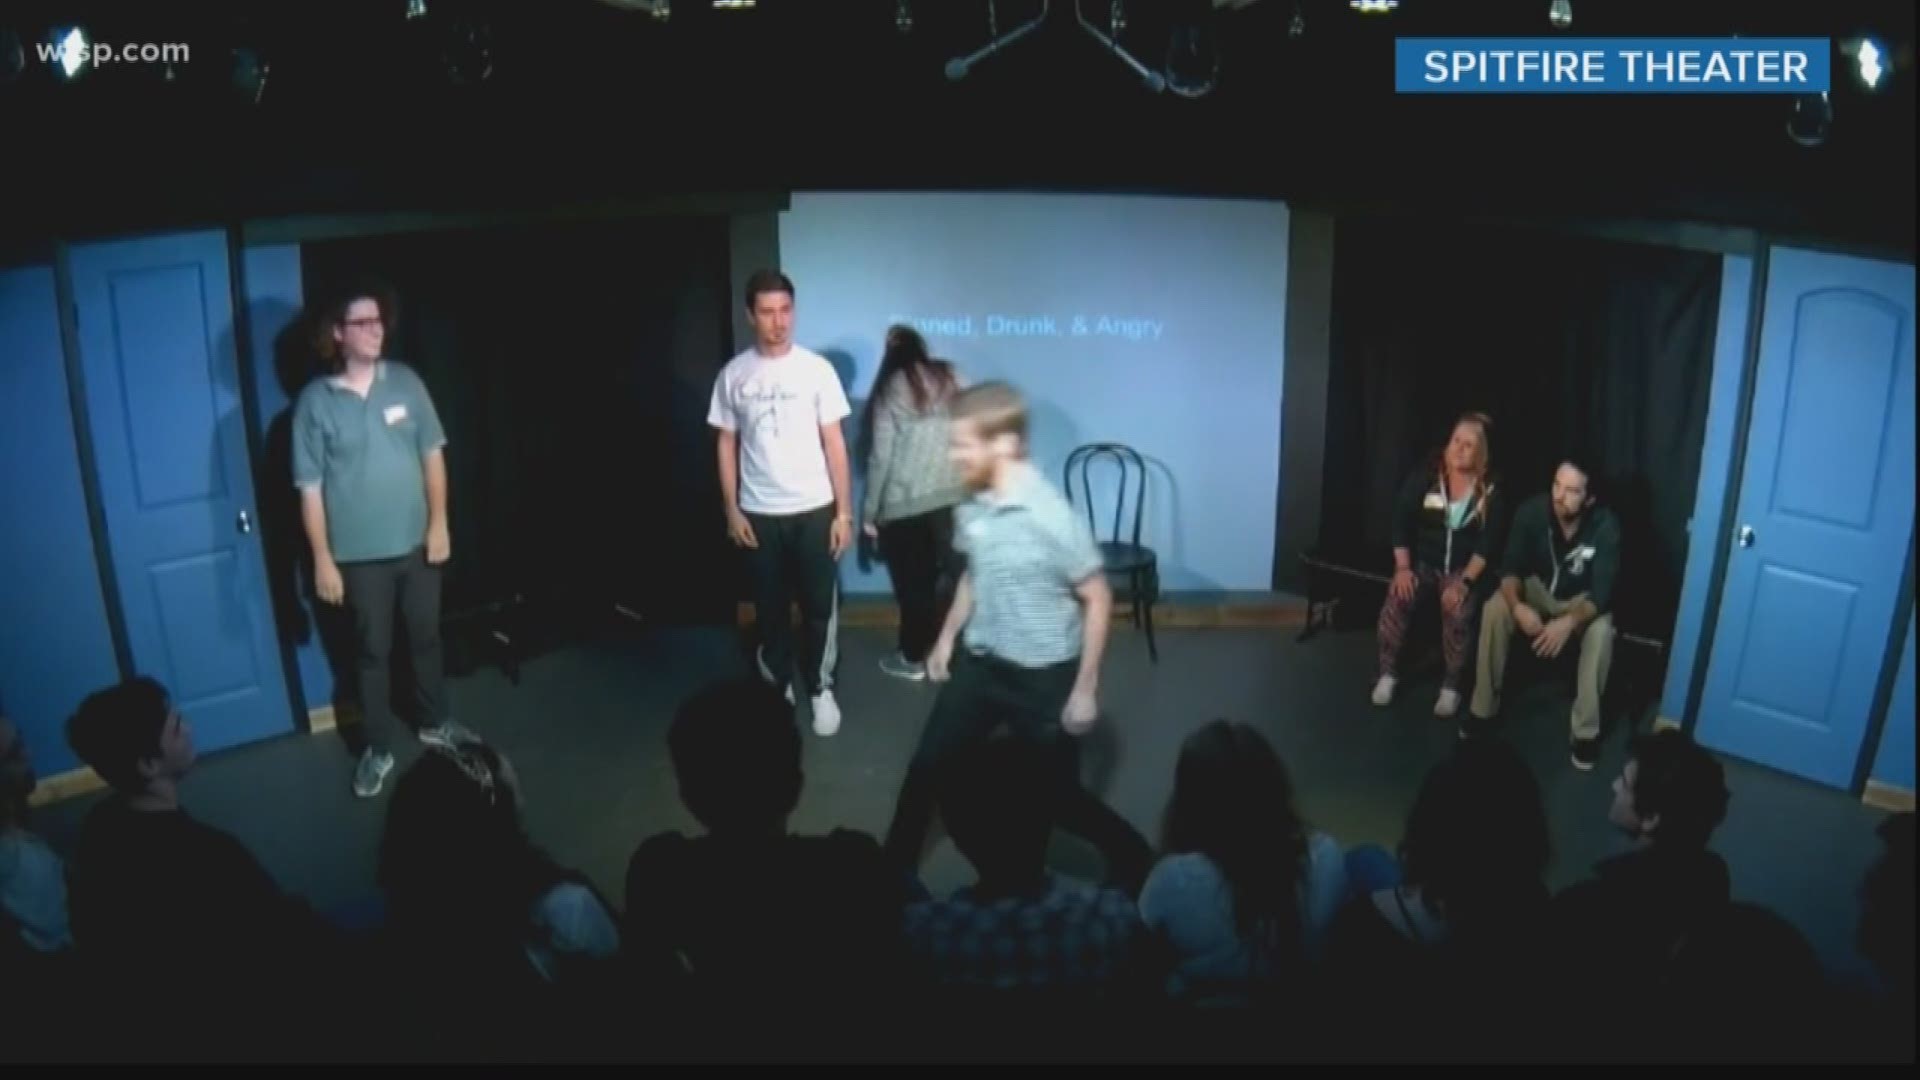 The workers at Spitfire Theater in St. Petersburg train actors and go to special events to train themselves. https://on.wtsp.com/2PU3vYq